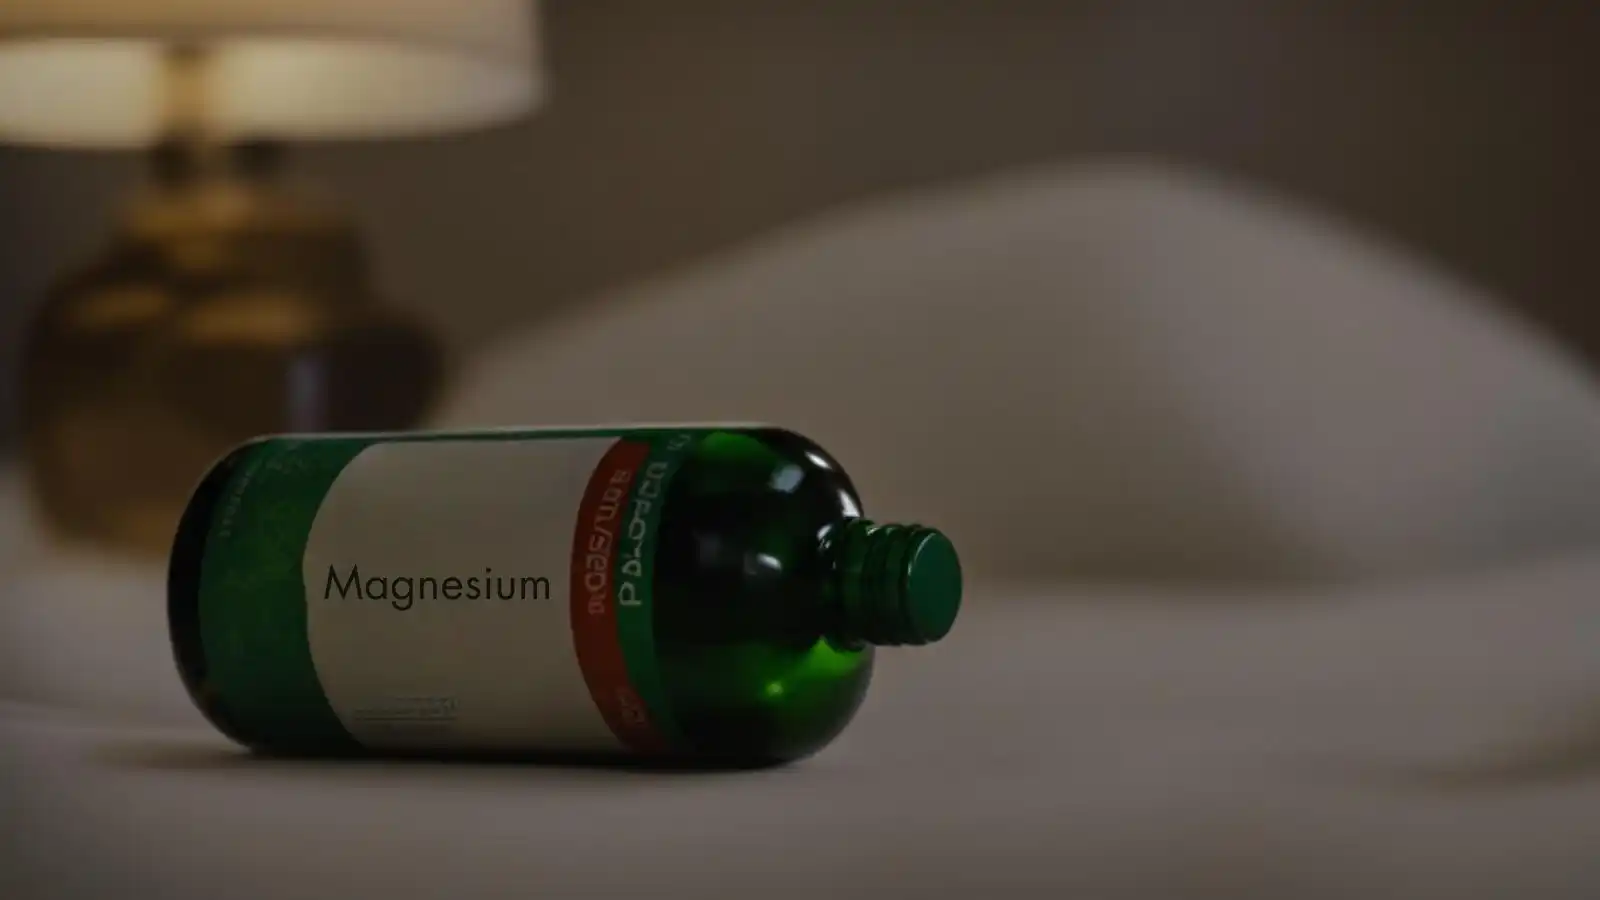 A bottle of magnesium supplement pills resting on a white pillow in a dimly lit bedroom